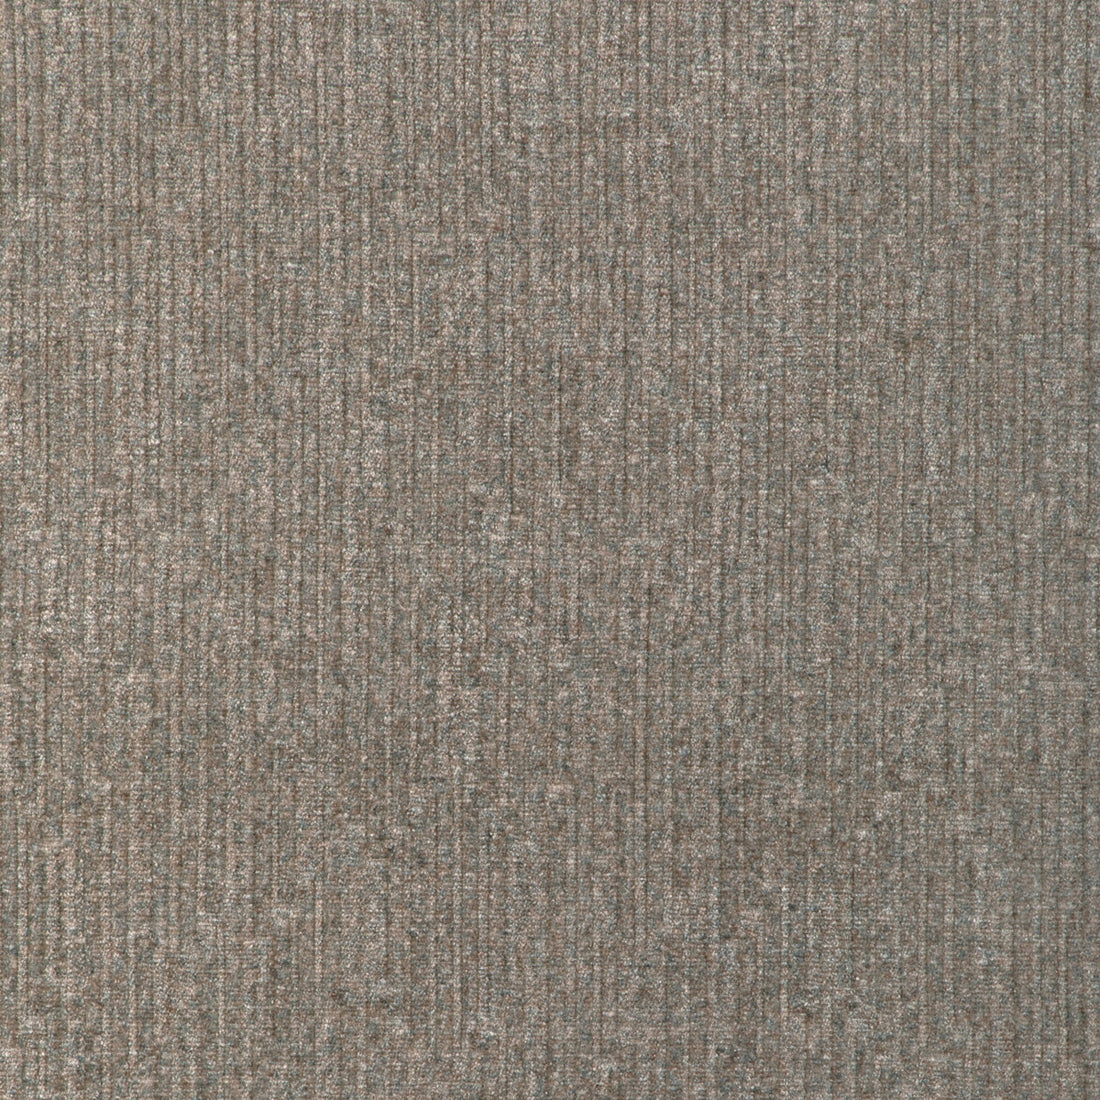 Kravet Design fabric in 37206-35 color - pattern 37206.35.0 - by Kravet Design in the Woven Colors collection